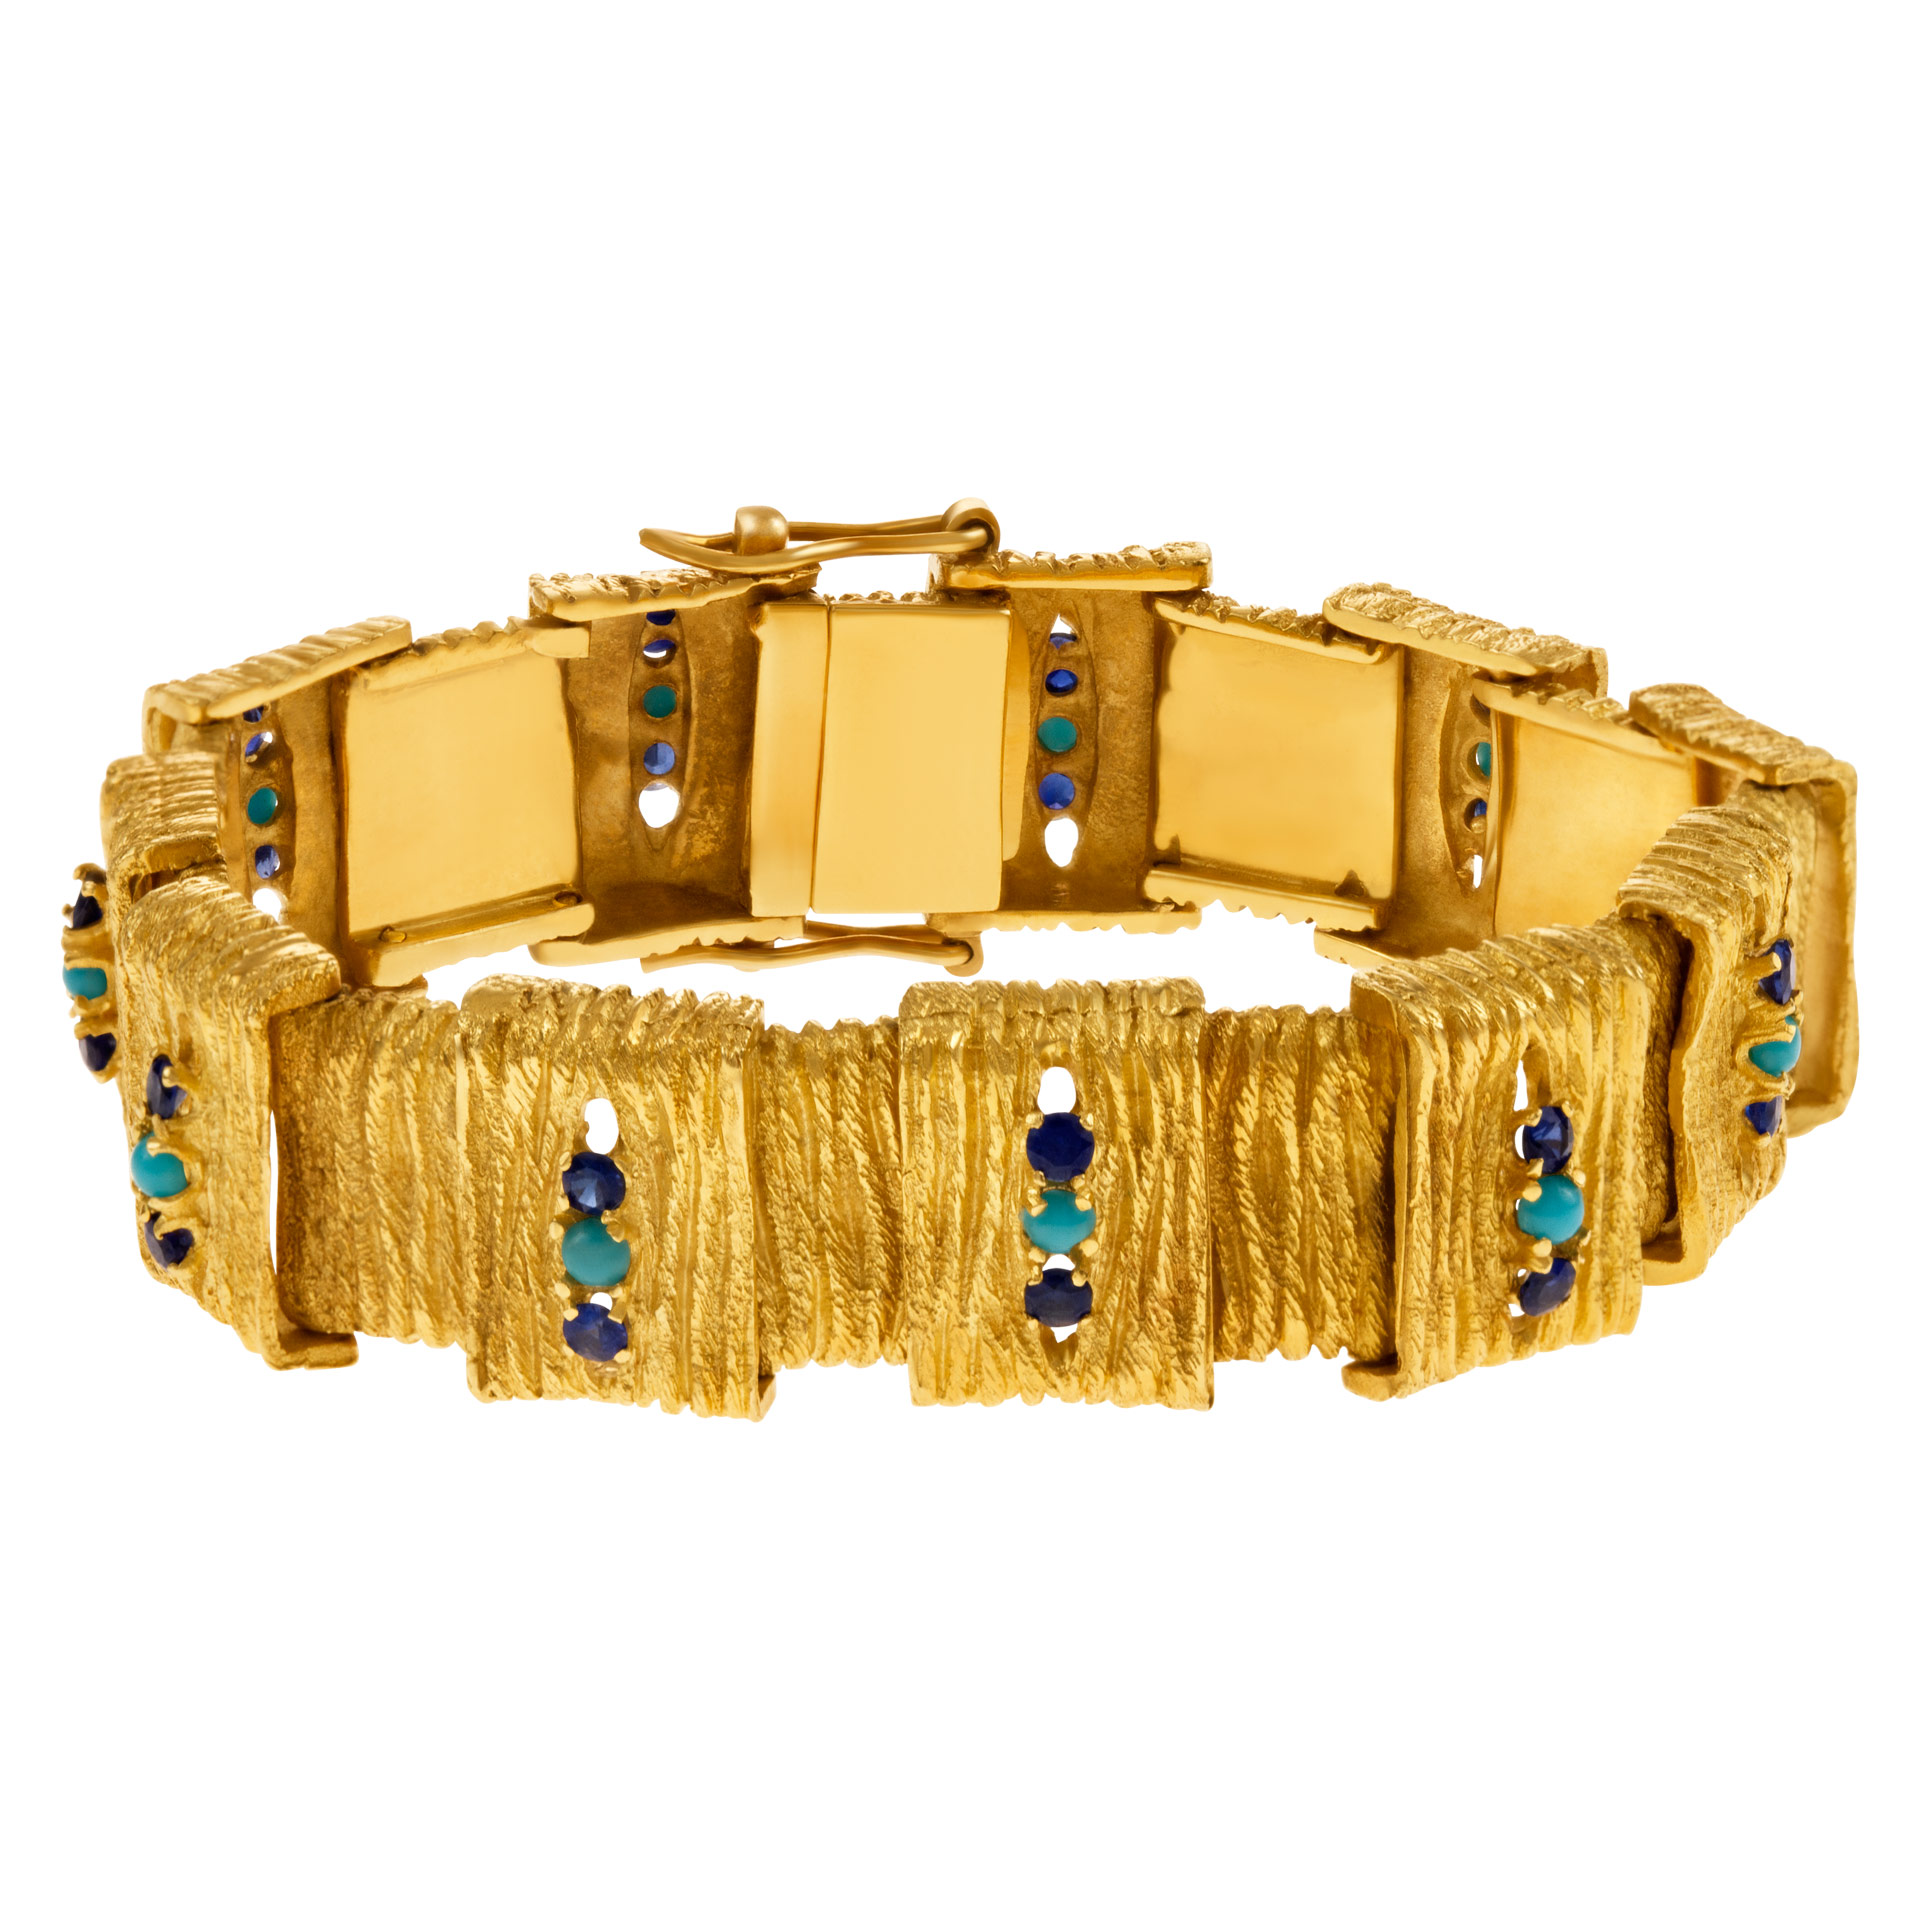 Bracelet with blue accents in 18K gold